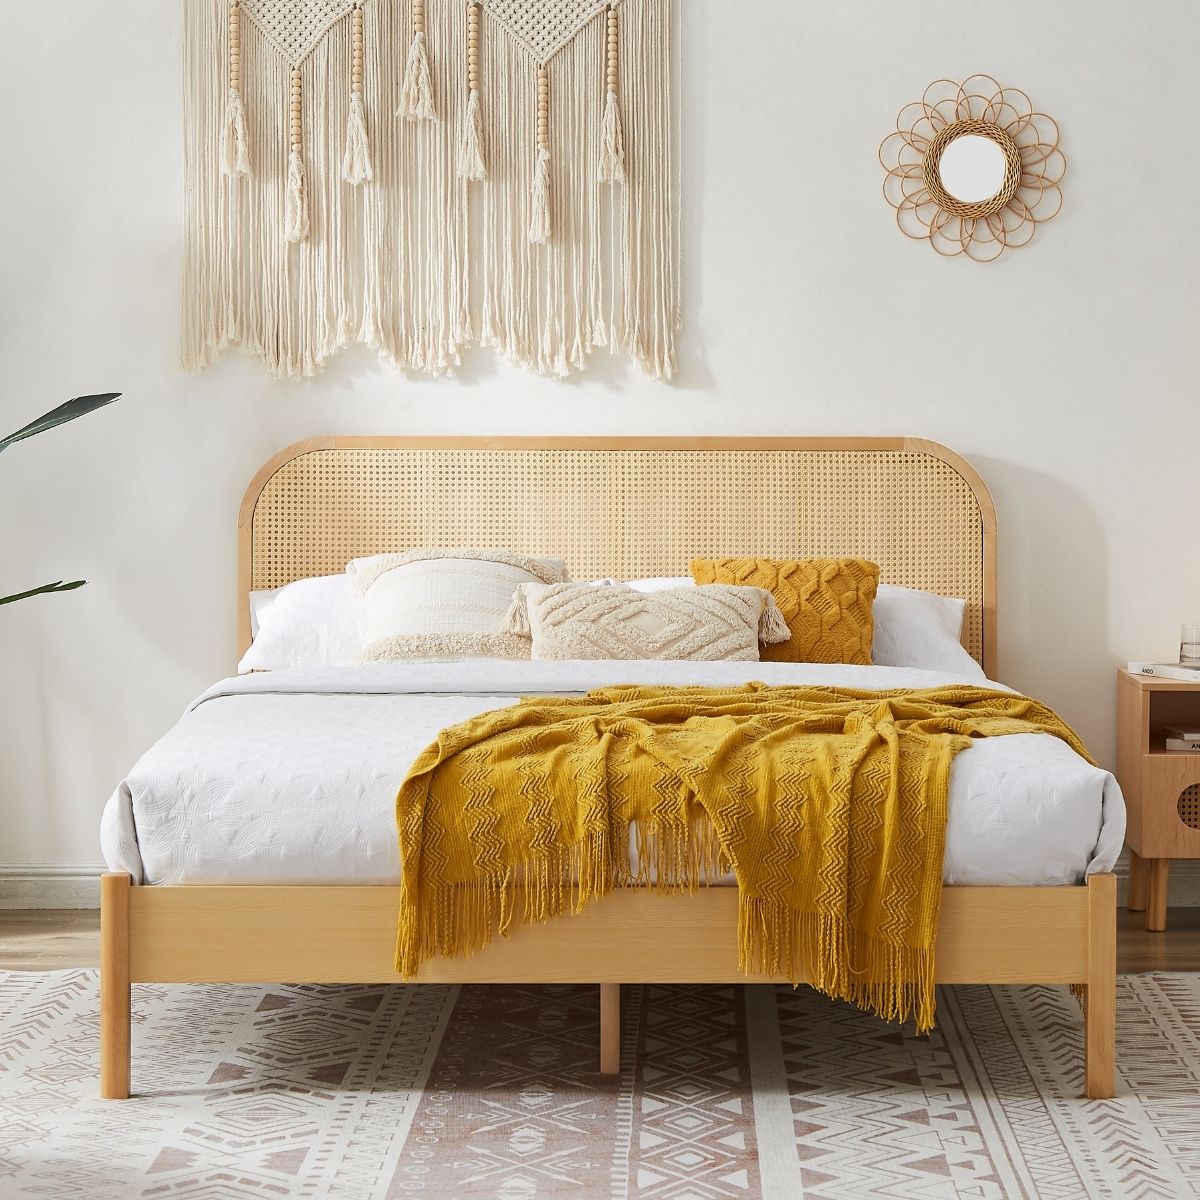 Queen Lulu Bed Frame with Curved Rattan Bedhead